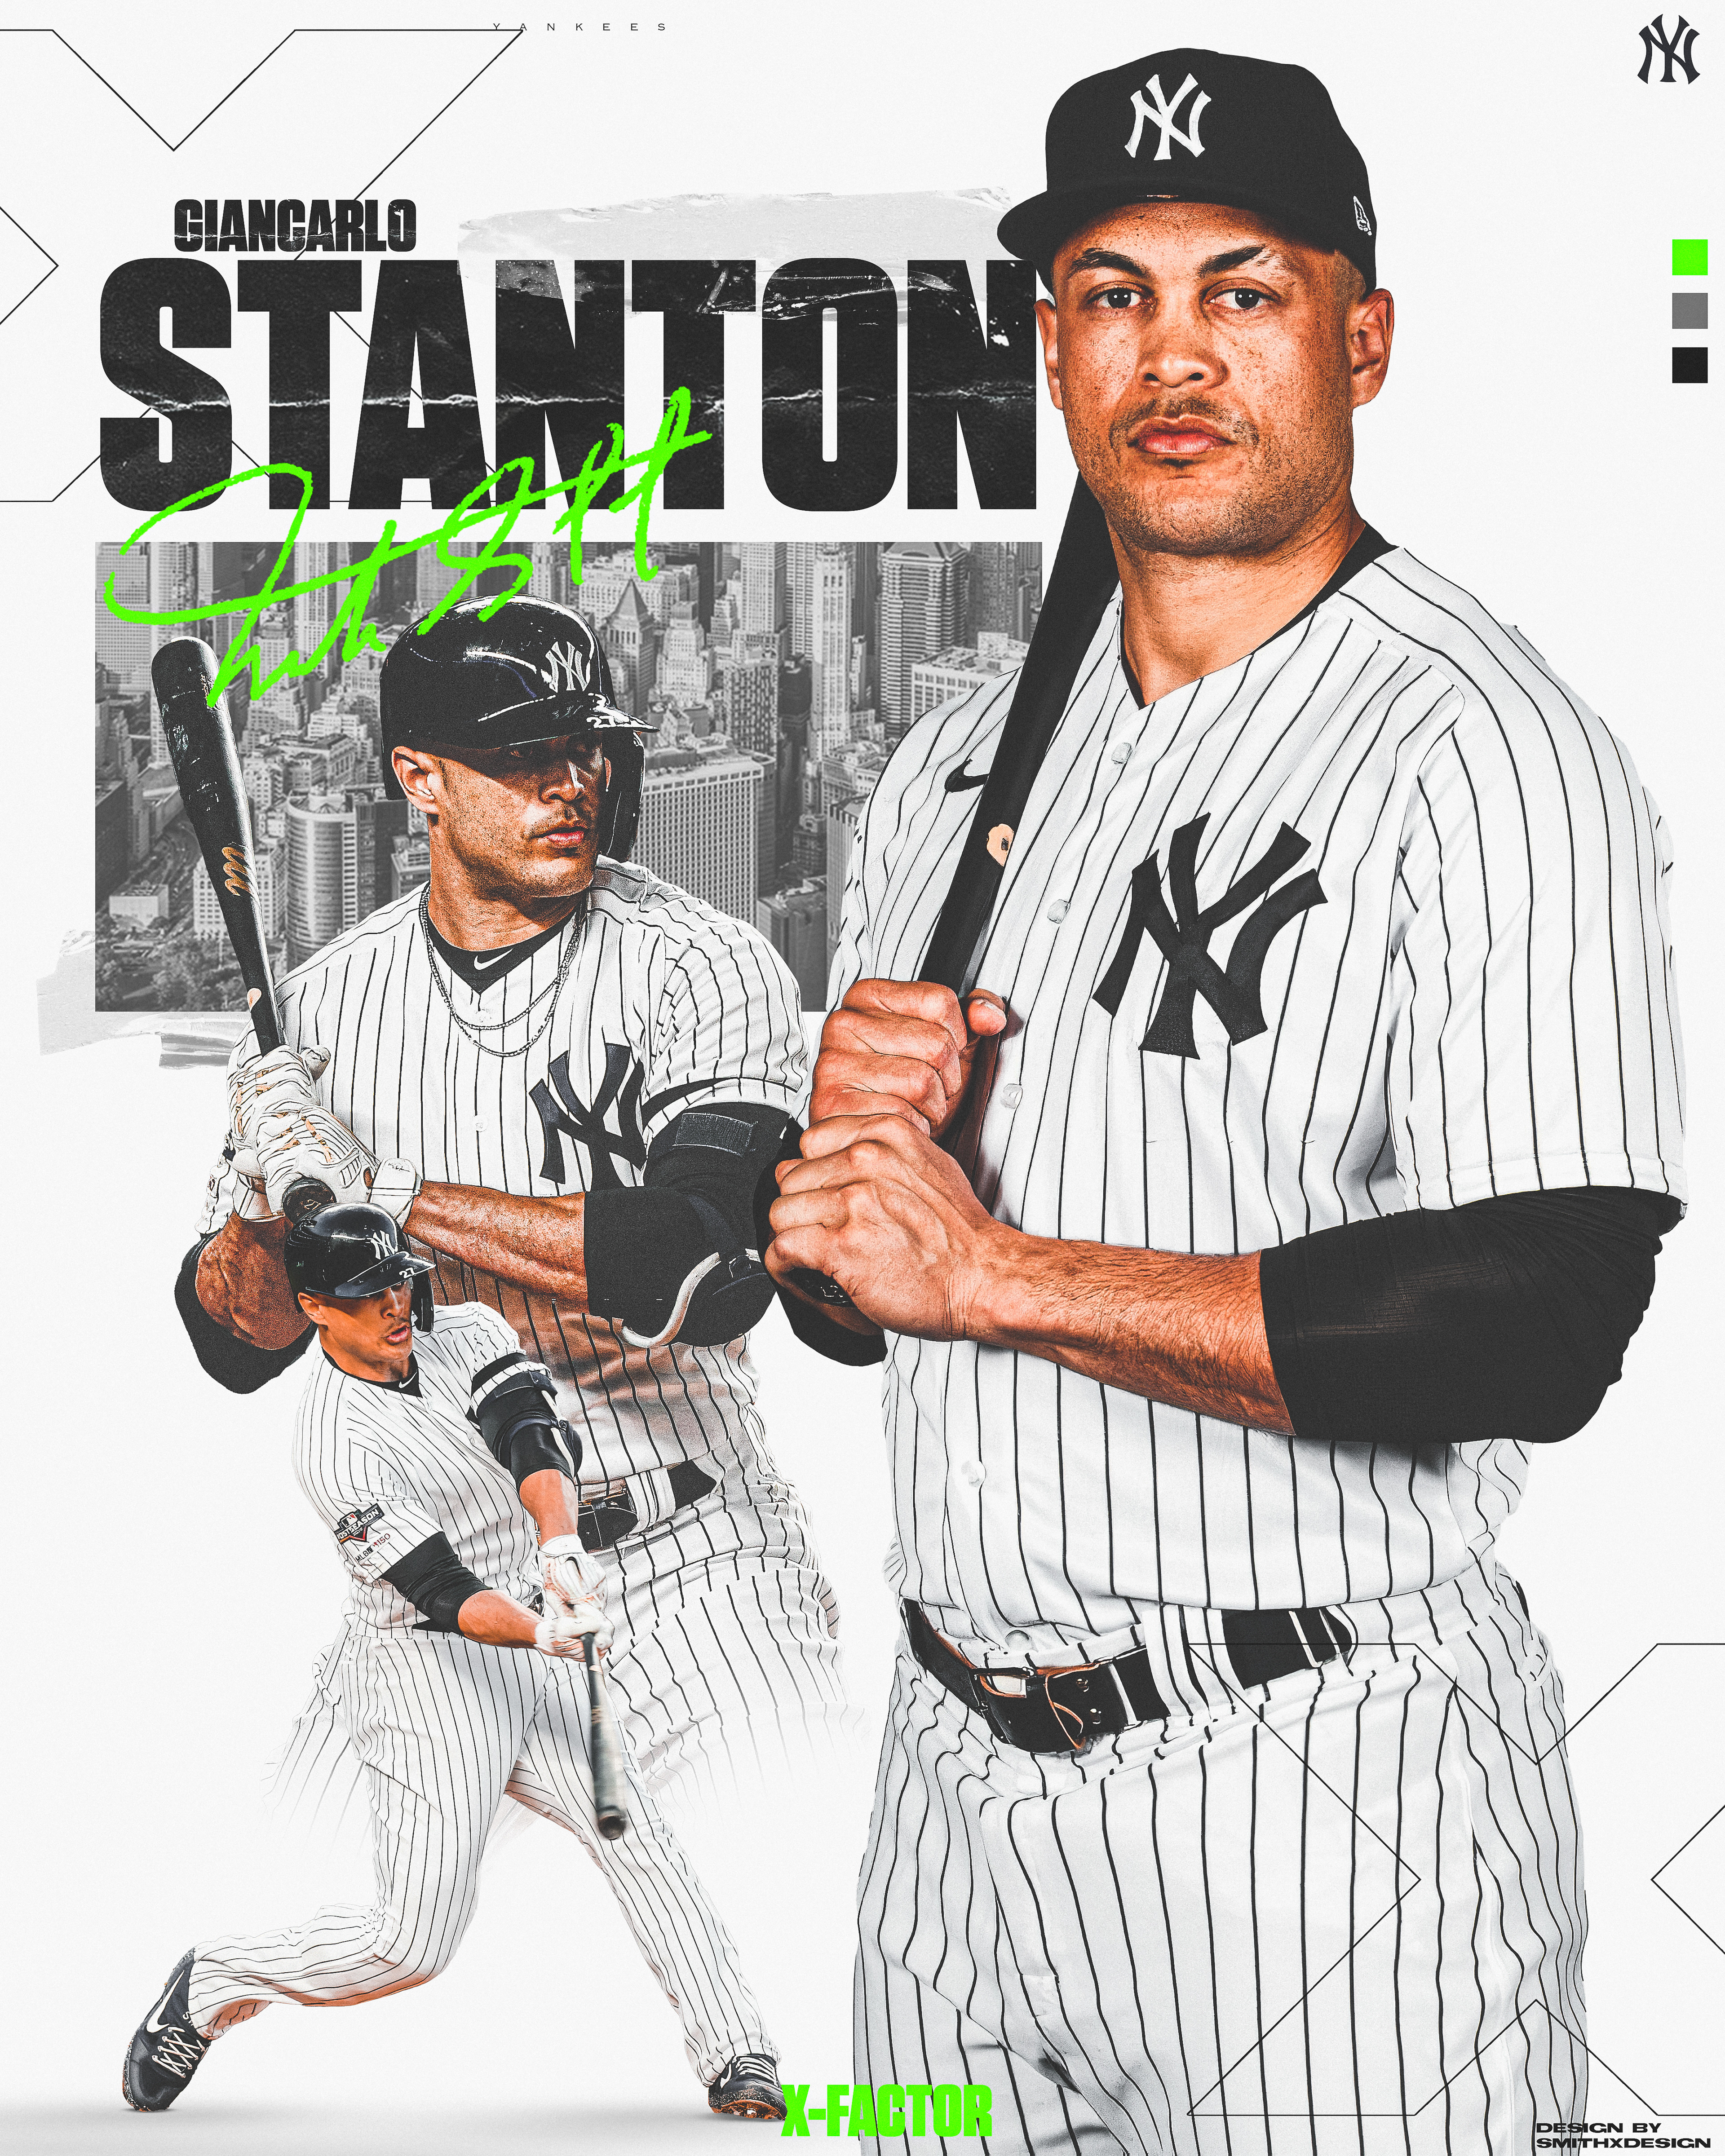 smithxdesign on X: Aaron Judge has been the best MLB player this